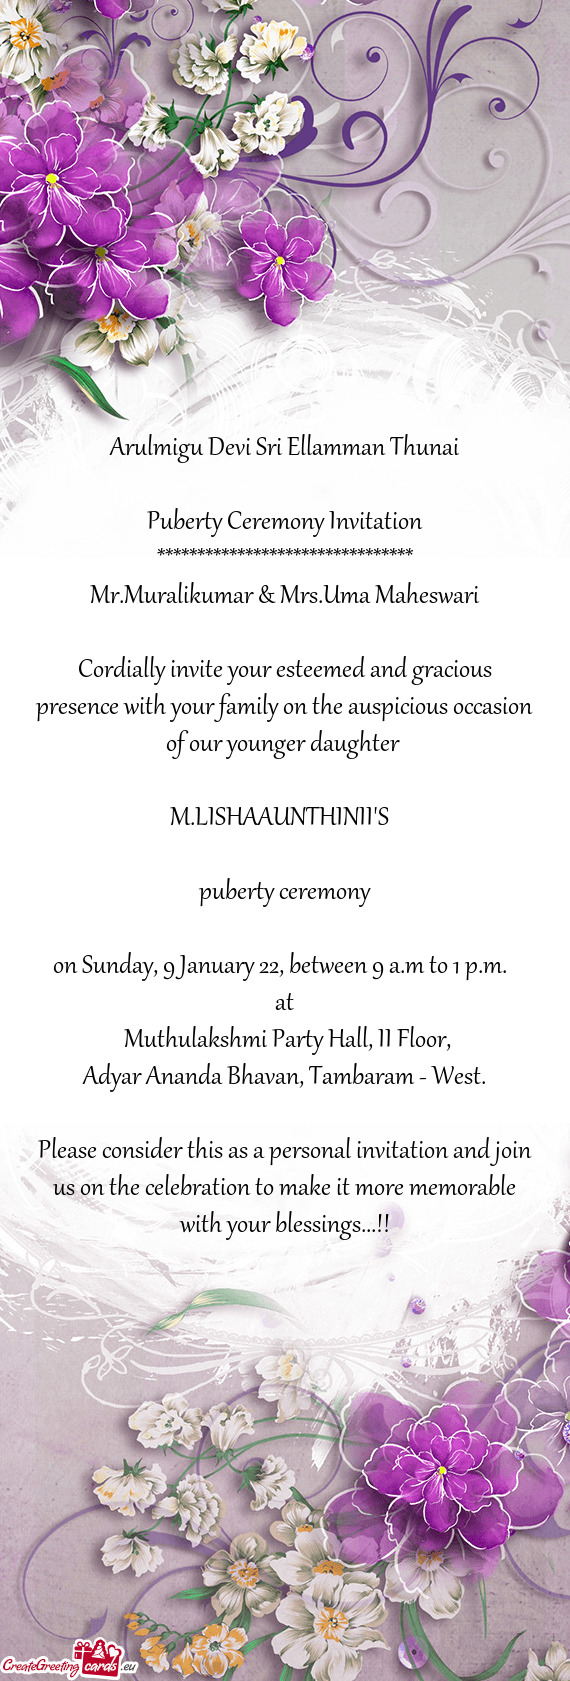 Cordially invite your esteemed and gracious presence with your family on the auspicious occasion of